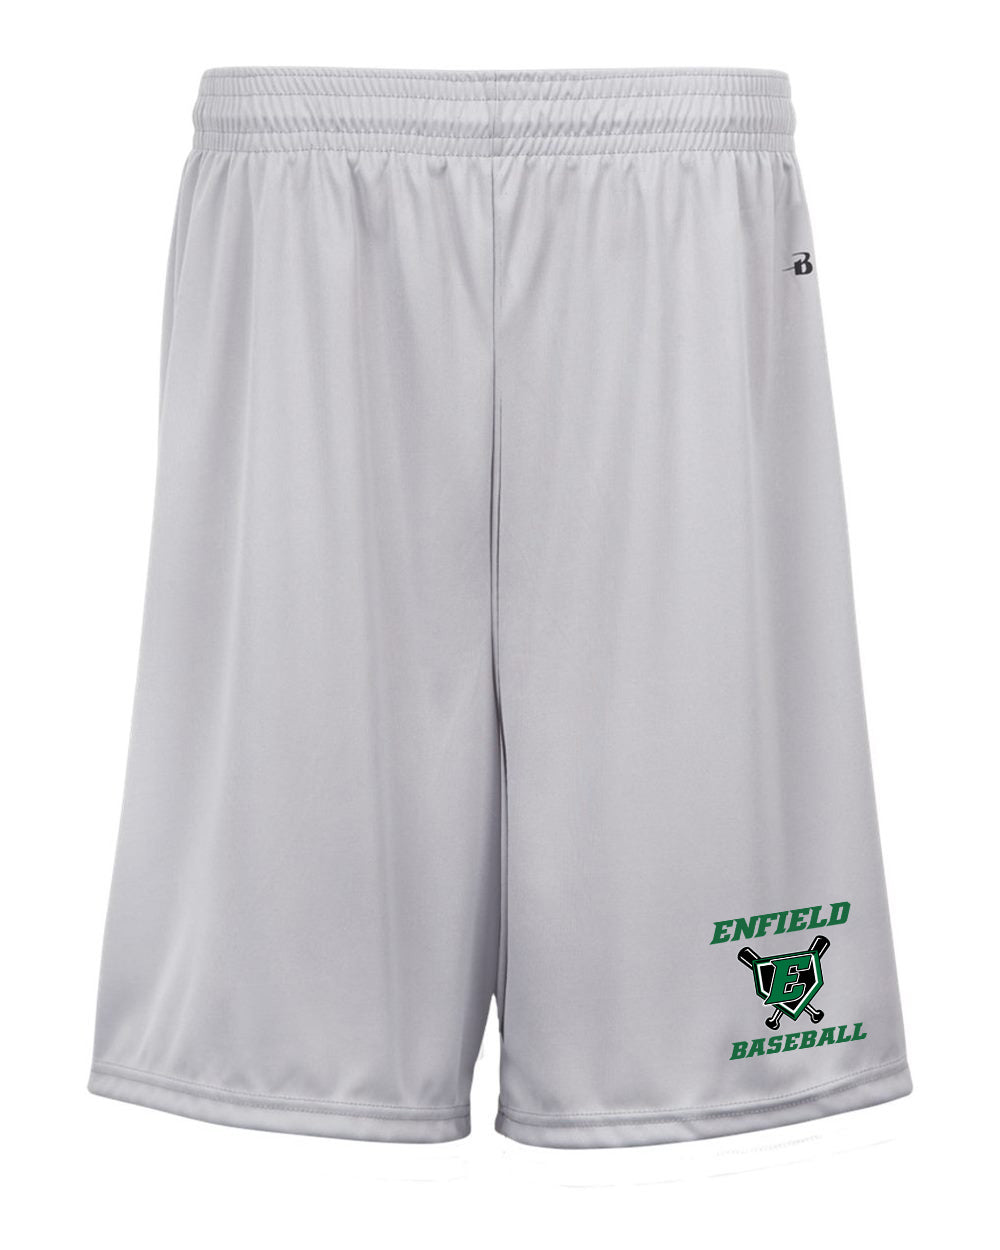 ELL Youth B-Dry Badger Shorts - 2107 (color options available)